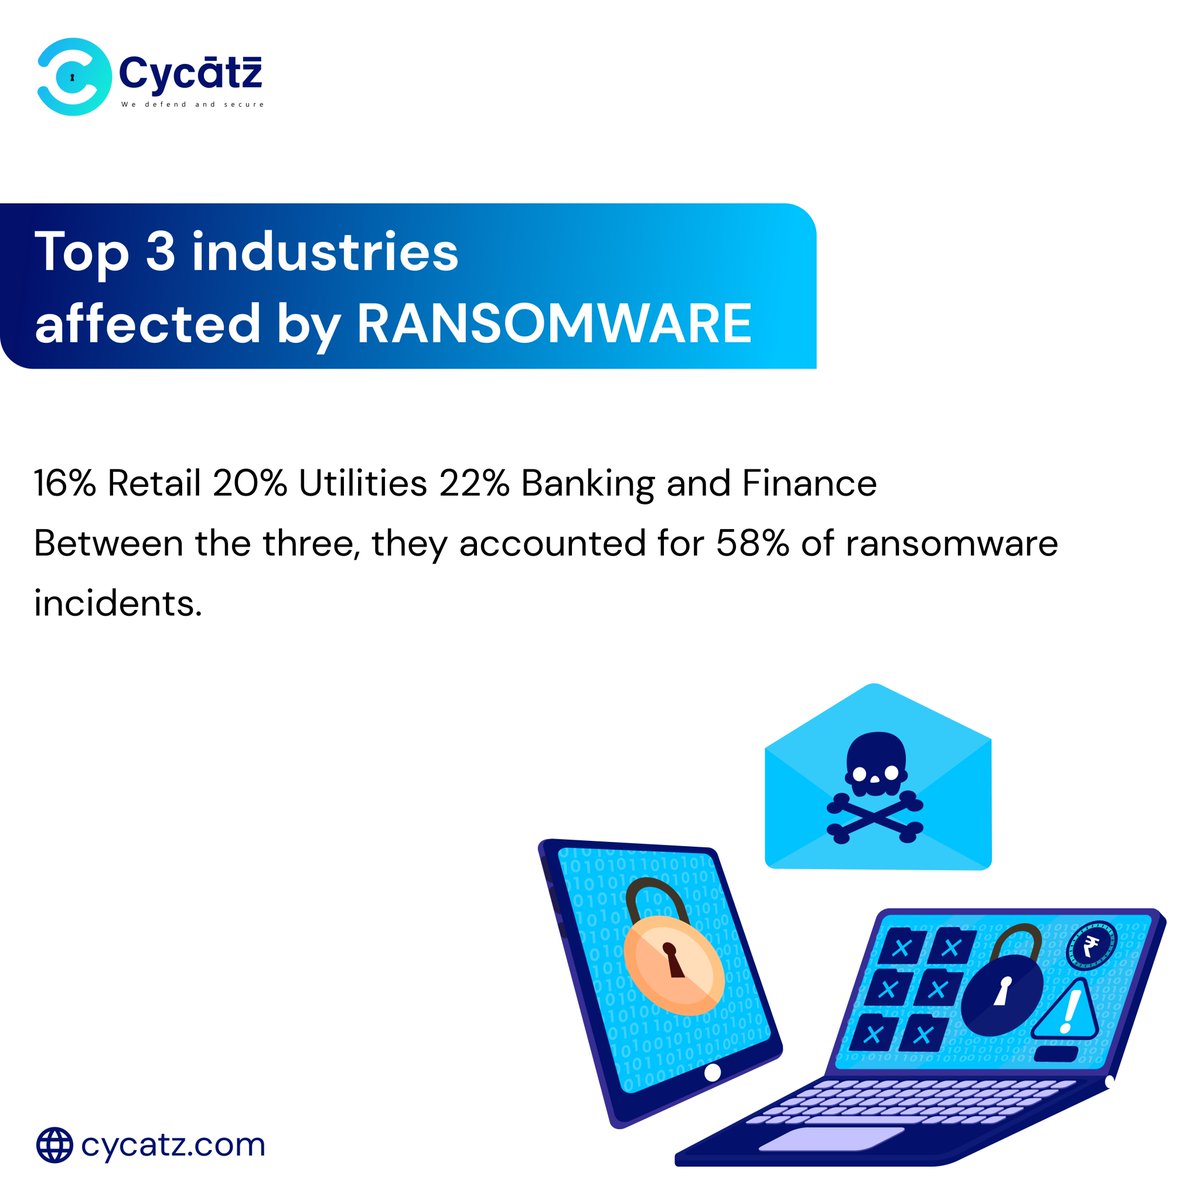 #CyCatz #cybersecurity Top 3 industries affected by RANSOMWARE

#cyberawareness #cyberattack #breaches #databreaches #cybercrime #darkwebmonitoring #SurfaceWebMonitoring #mobilesecurity #emailsecurity #vendorriskmanagement #BrandMonitoring #cyber #security